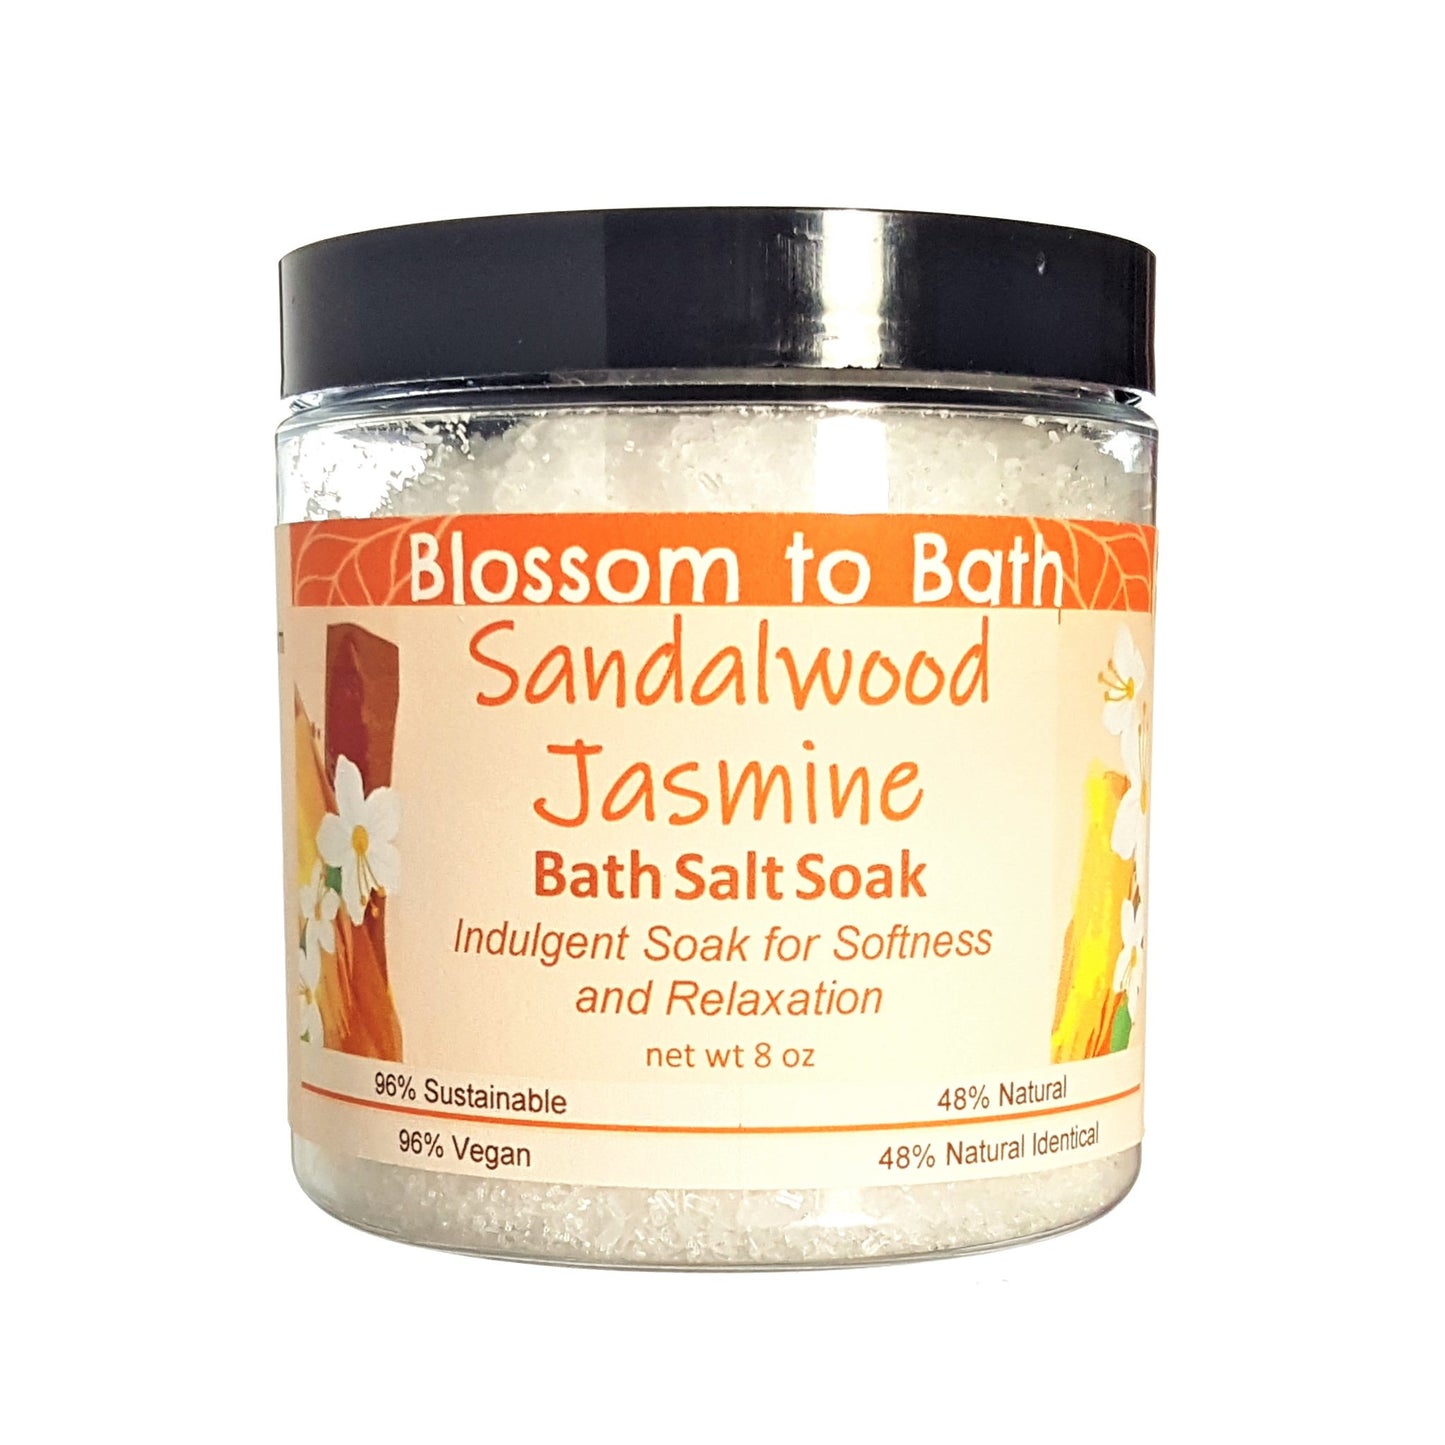 Buy Blossom to Bath Sandalwood Jasmine Bath Salt Soak from Flowersong Soap Studio.  Scented epsom salts for a luxurious soaking experience  Floral jasmine meets earthy sandalwood to create a soul stirring blend.